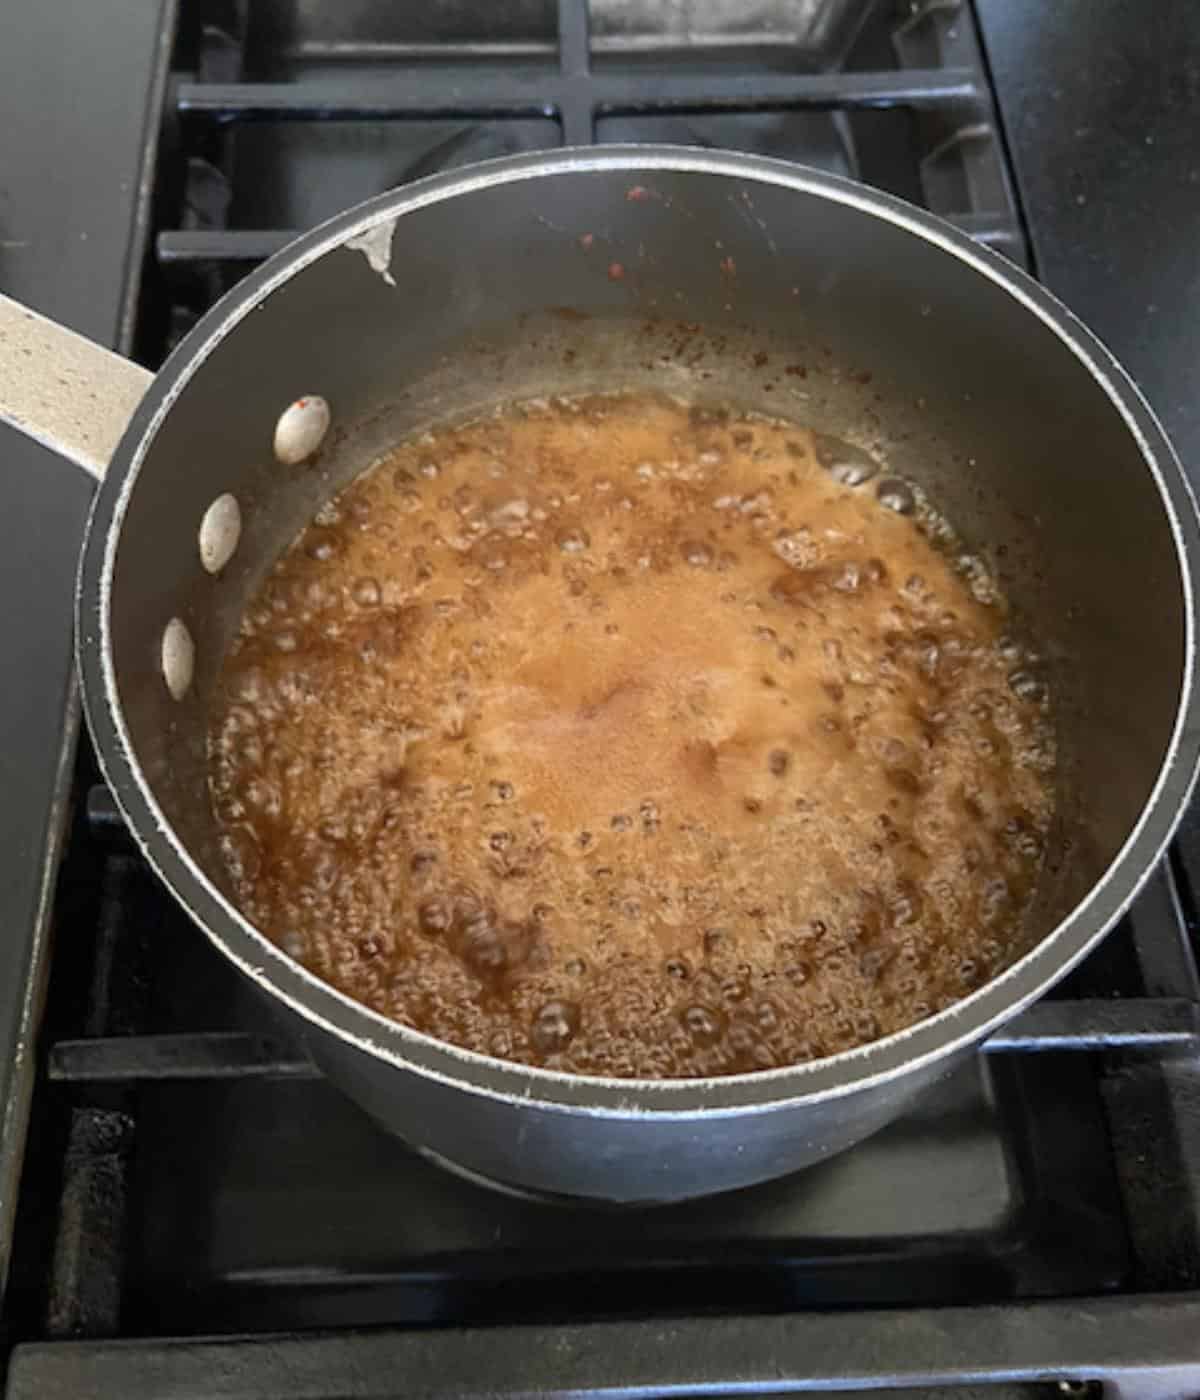 pineapple glaze coming to a boil in saucepan